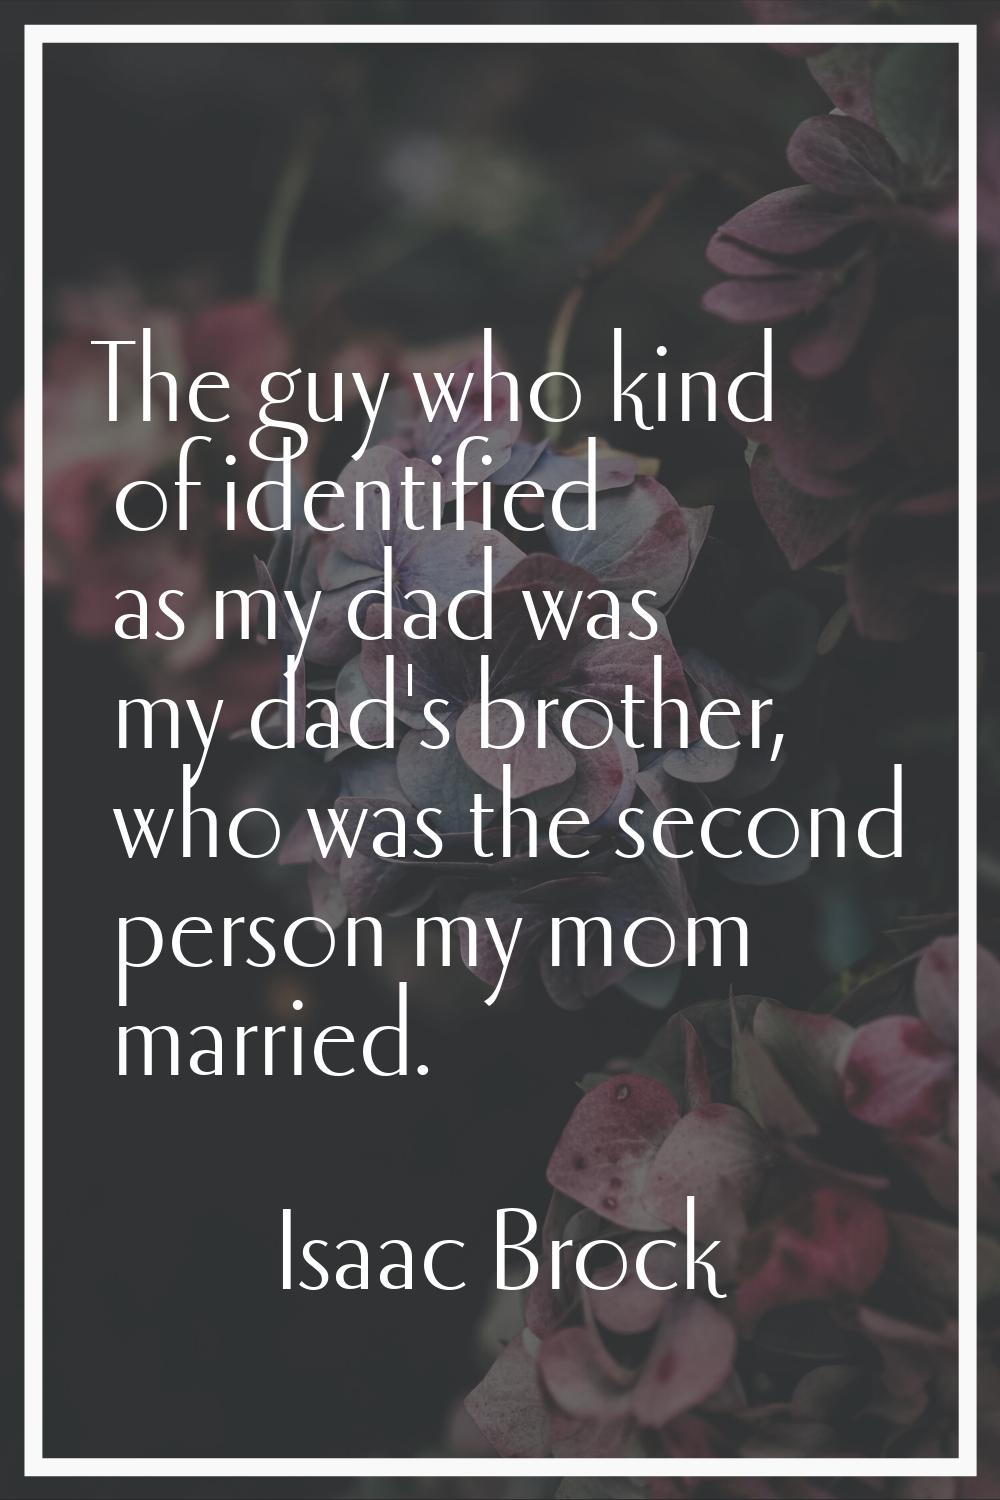 The guy who kind of identified as my dad was my dad's brother, who was the second person my mom mar